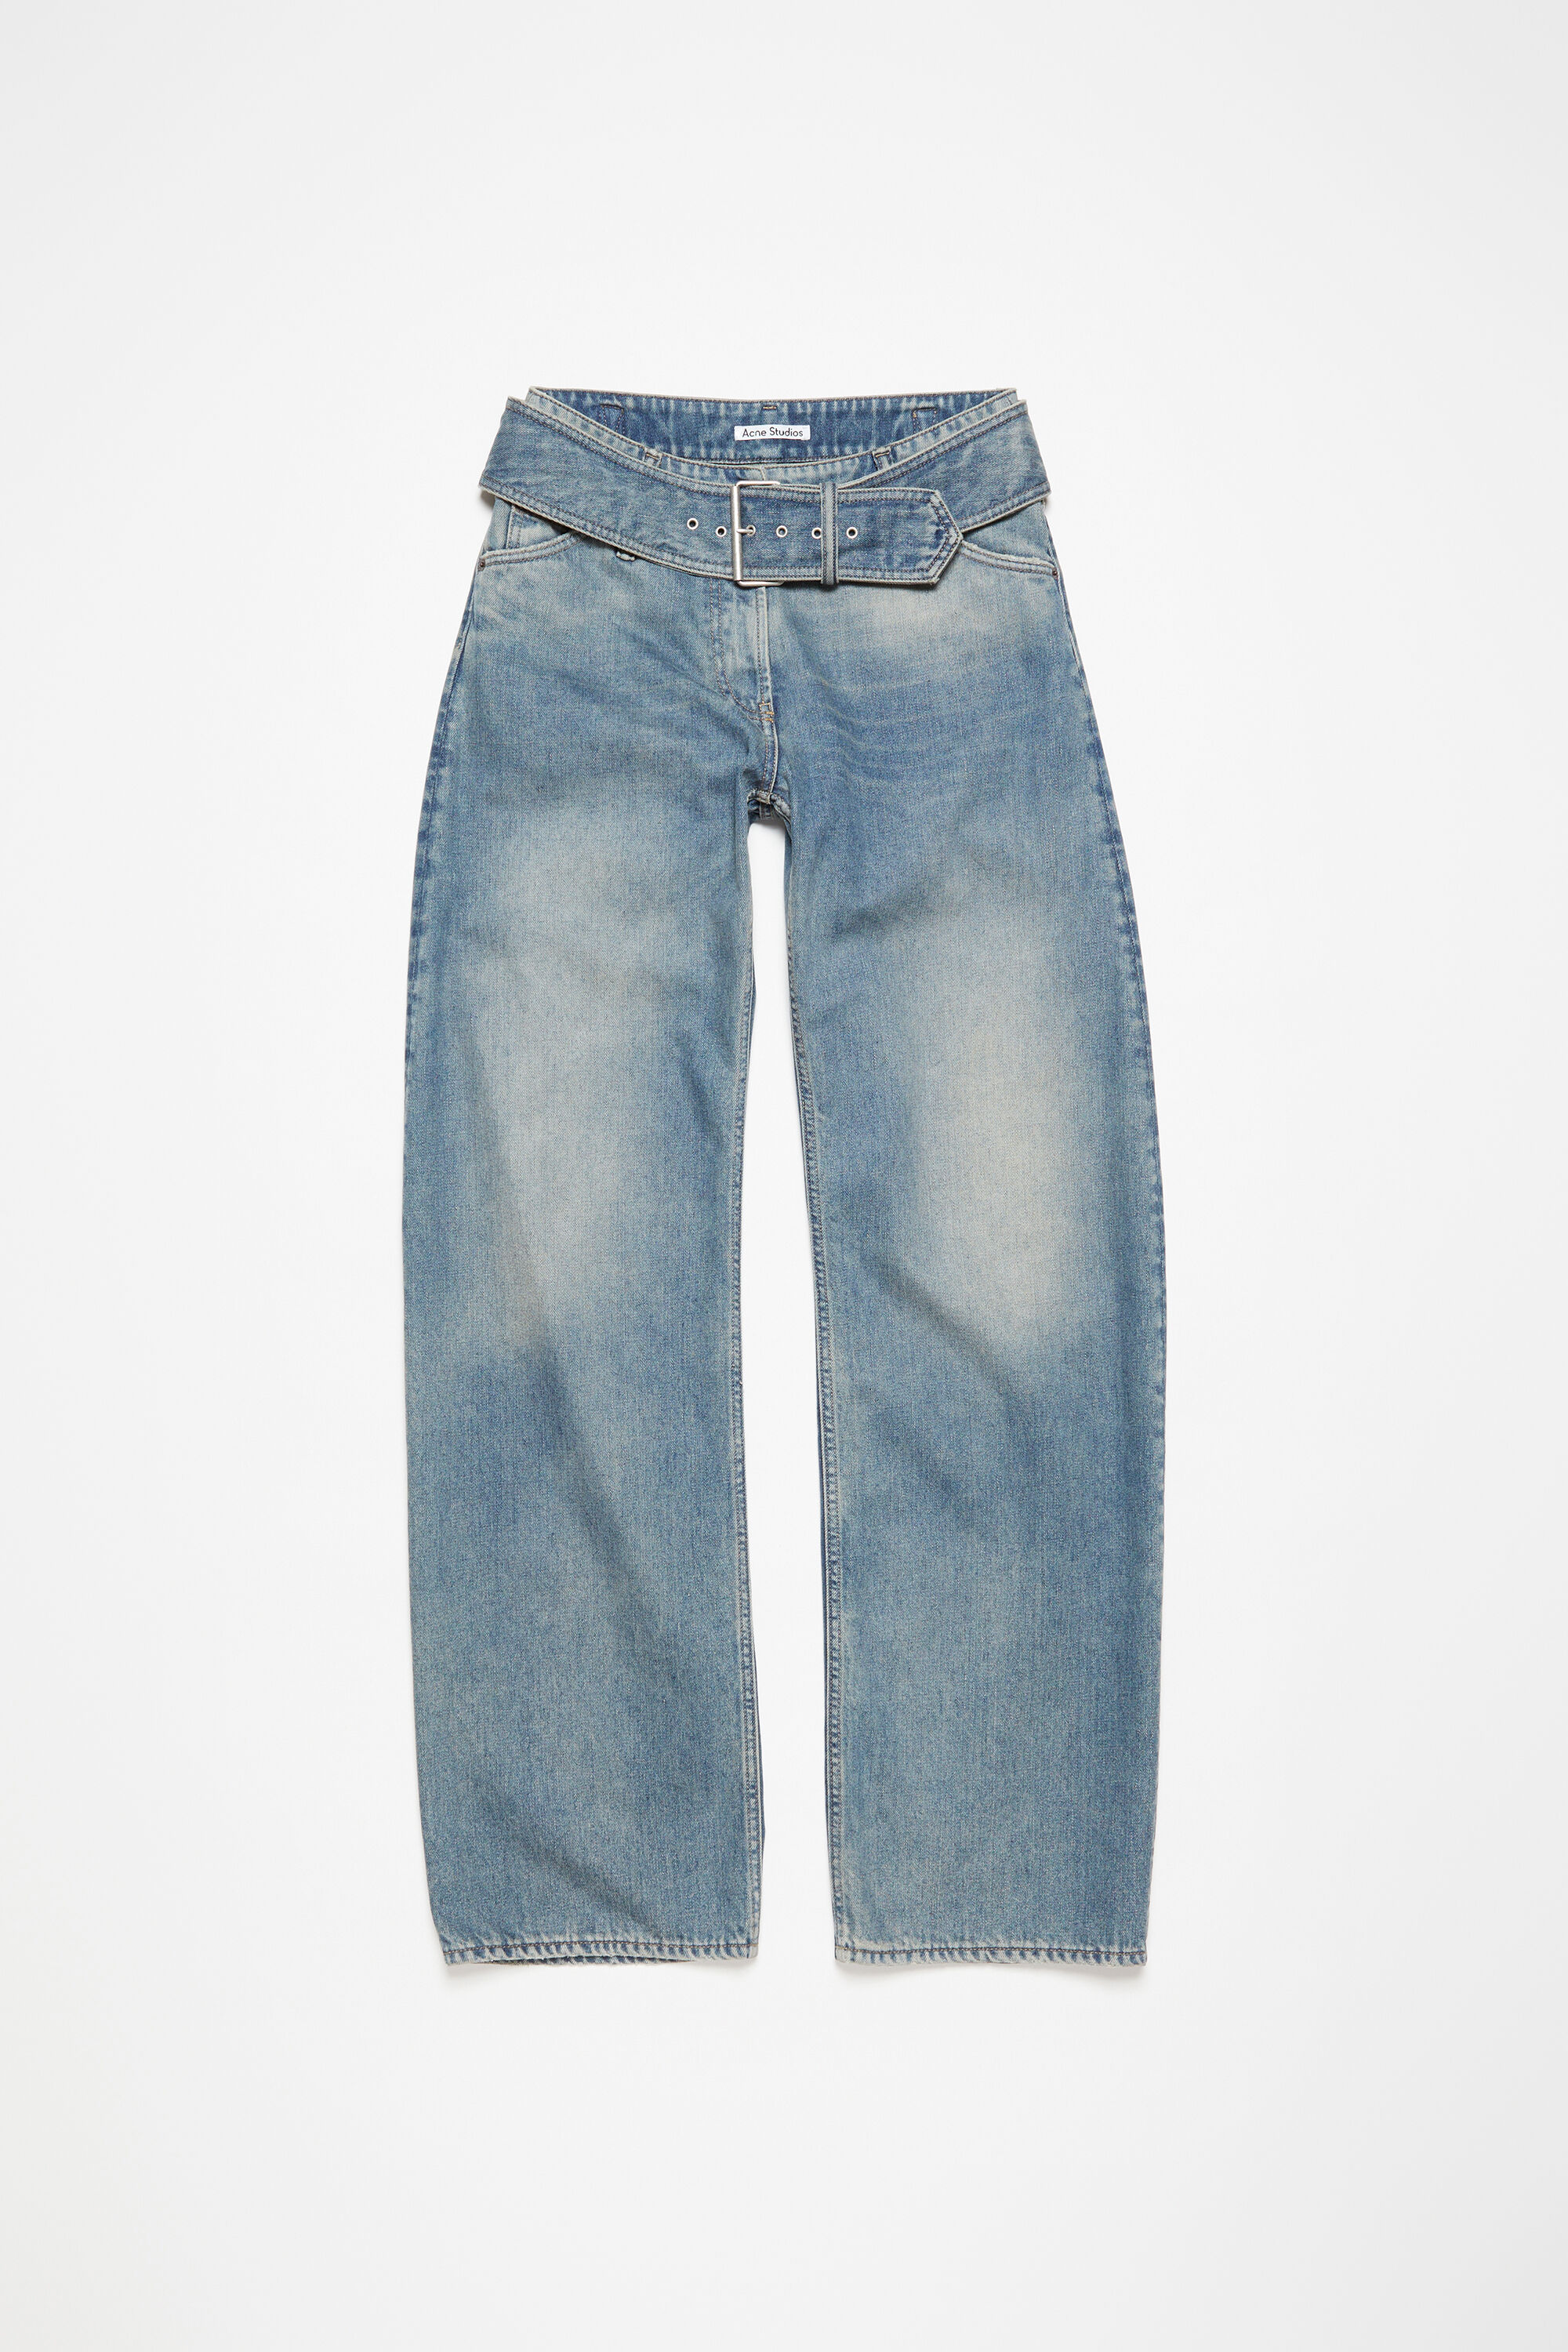 Acne Studios - Belted jeans - Relaxed fit - Mid Blue